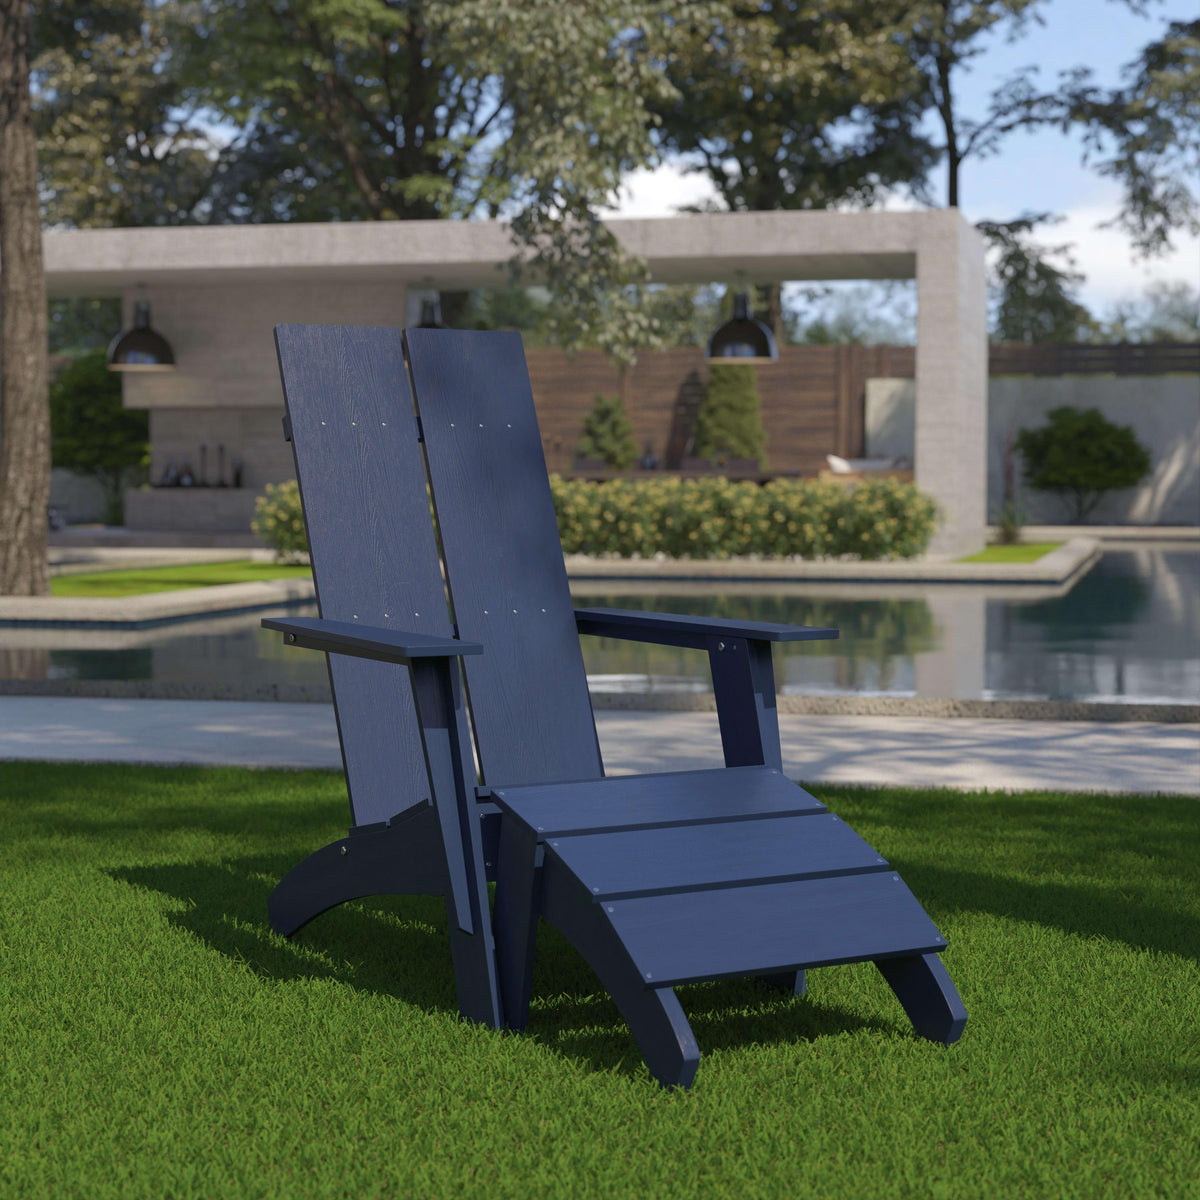 Navy |#| Indoor/Outdoor Modern 2-Slat Adirondack Style Chair and Footrest in Navy Blue